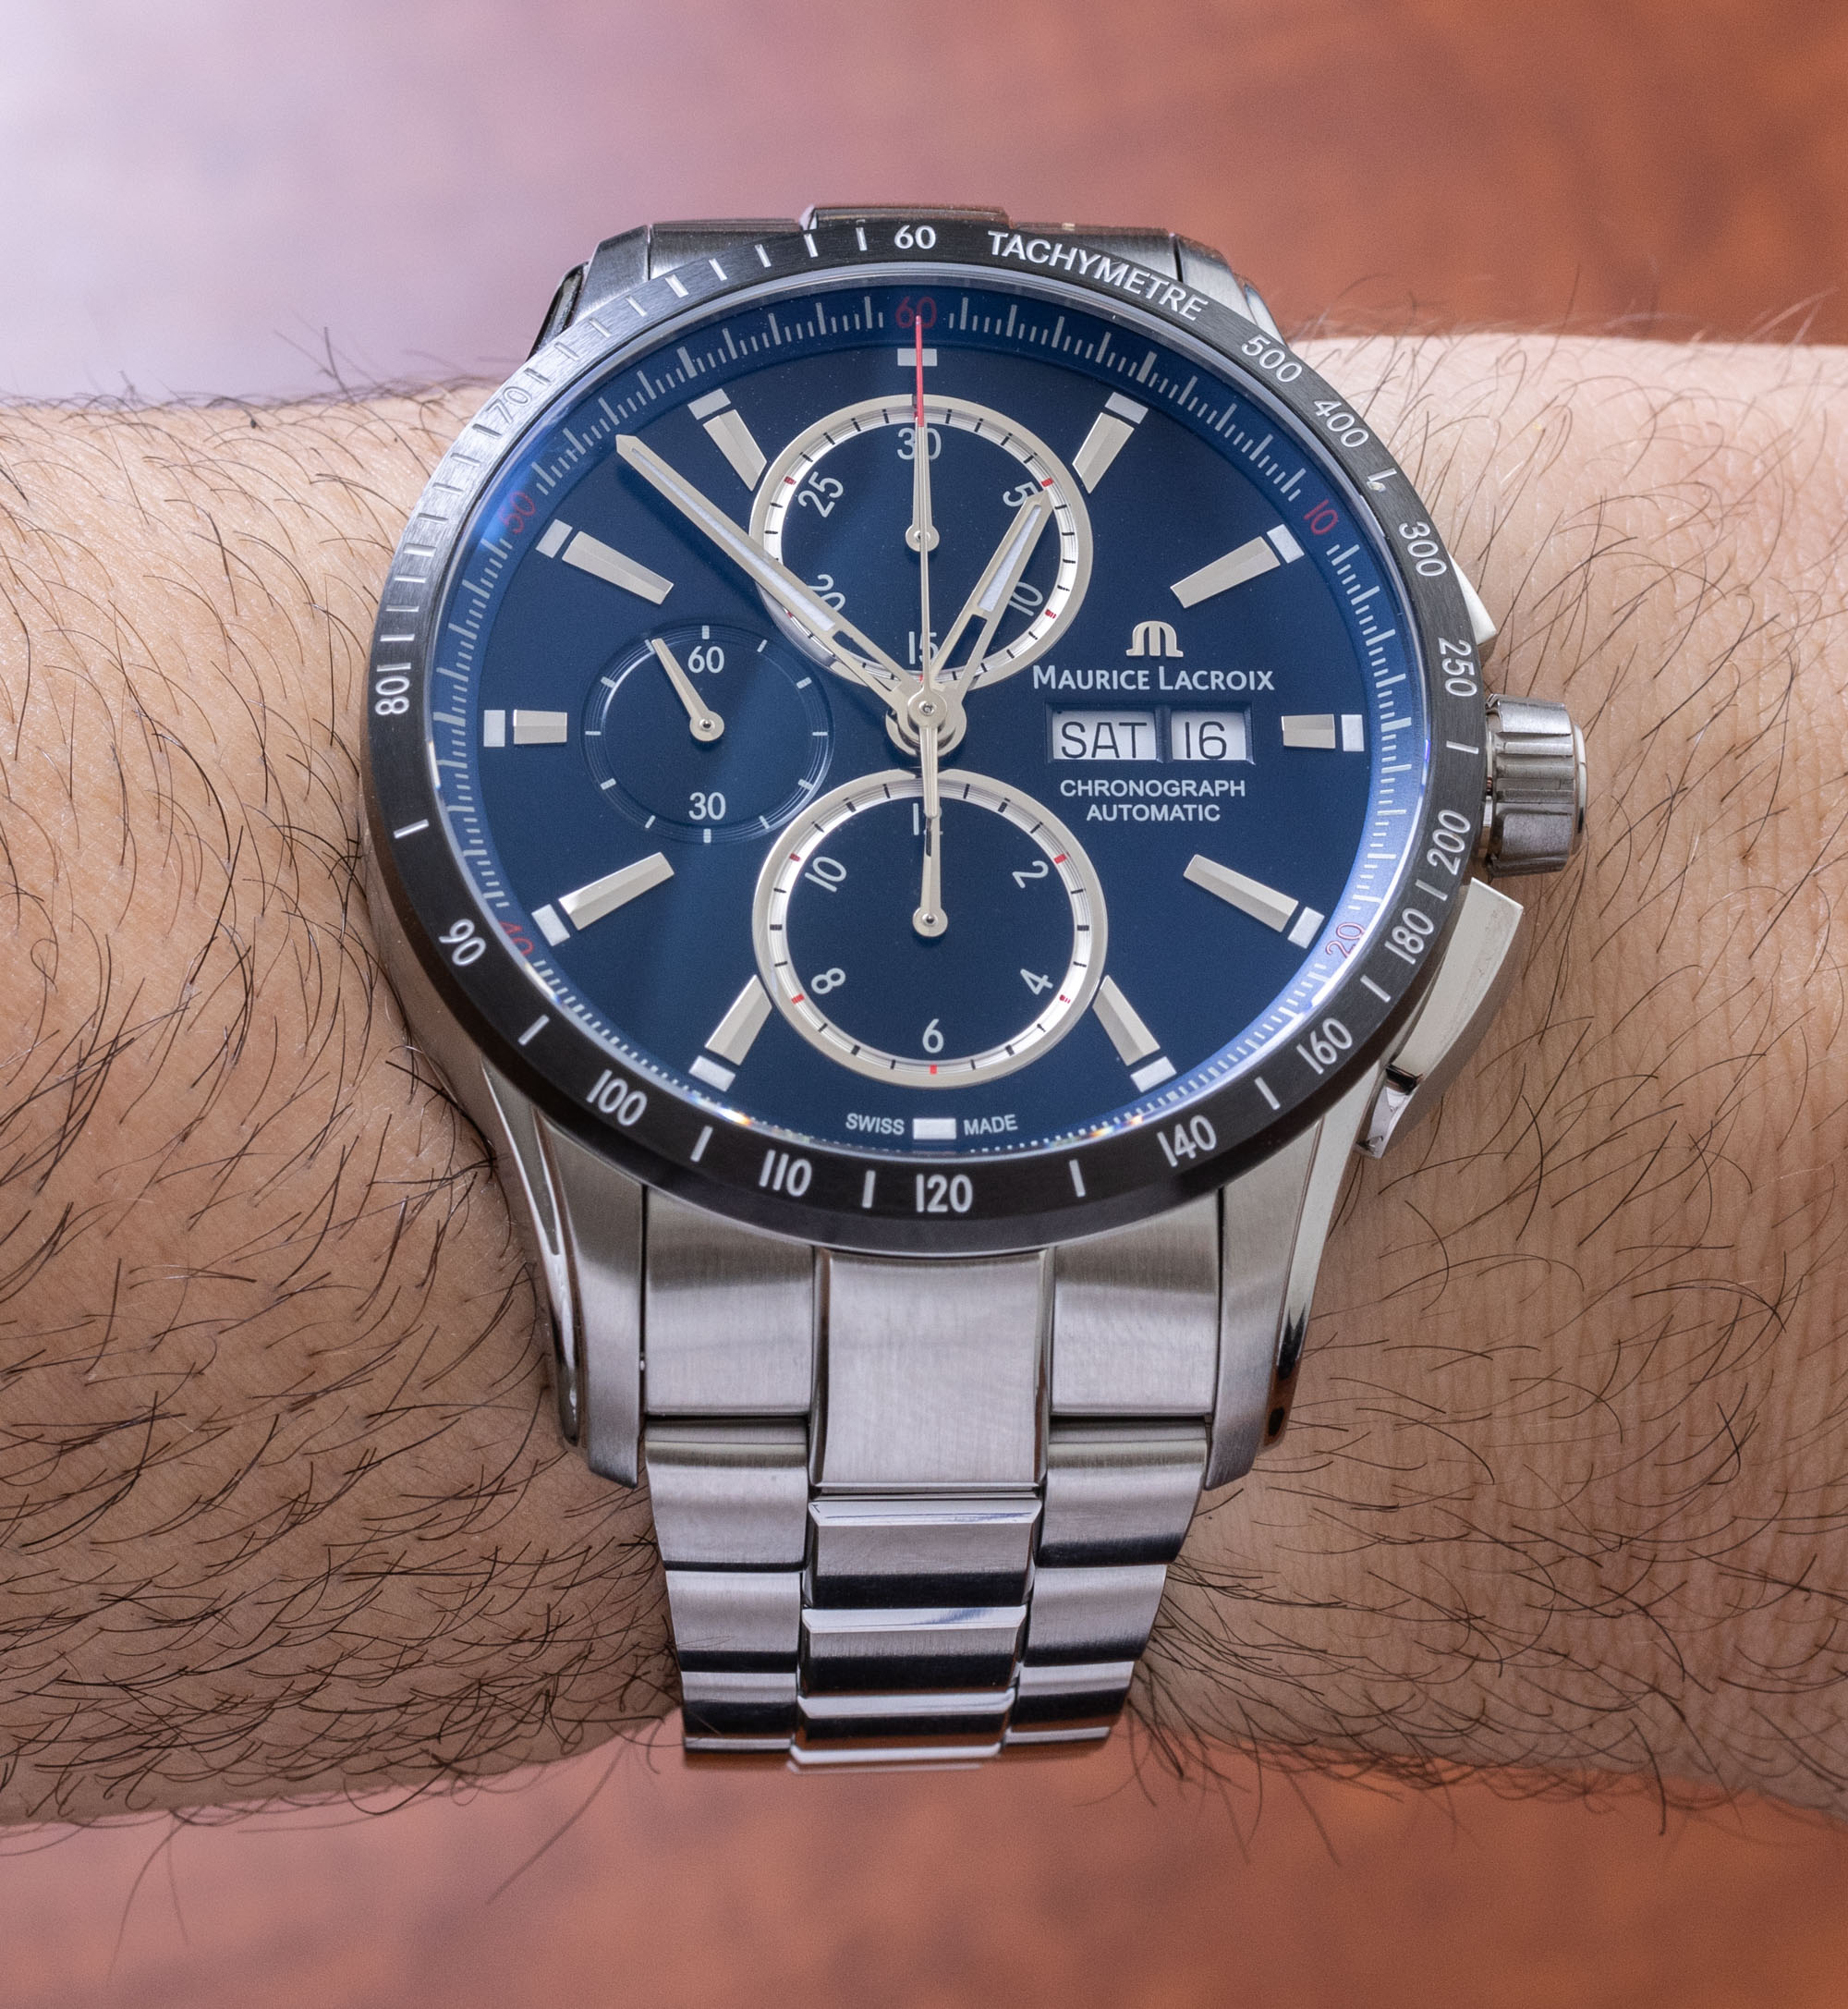 | Review: 43mm Lacroix aBlogtoWatch S Watch PONTOS Maurice Chronograph